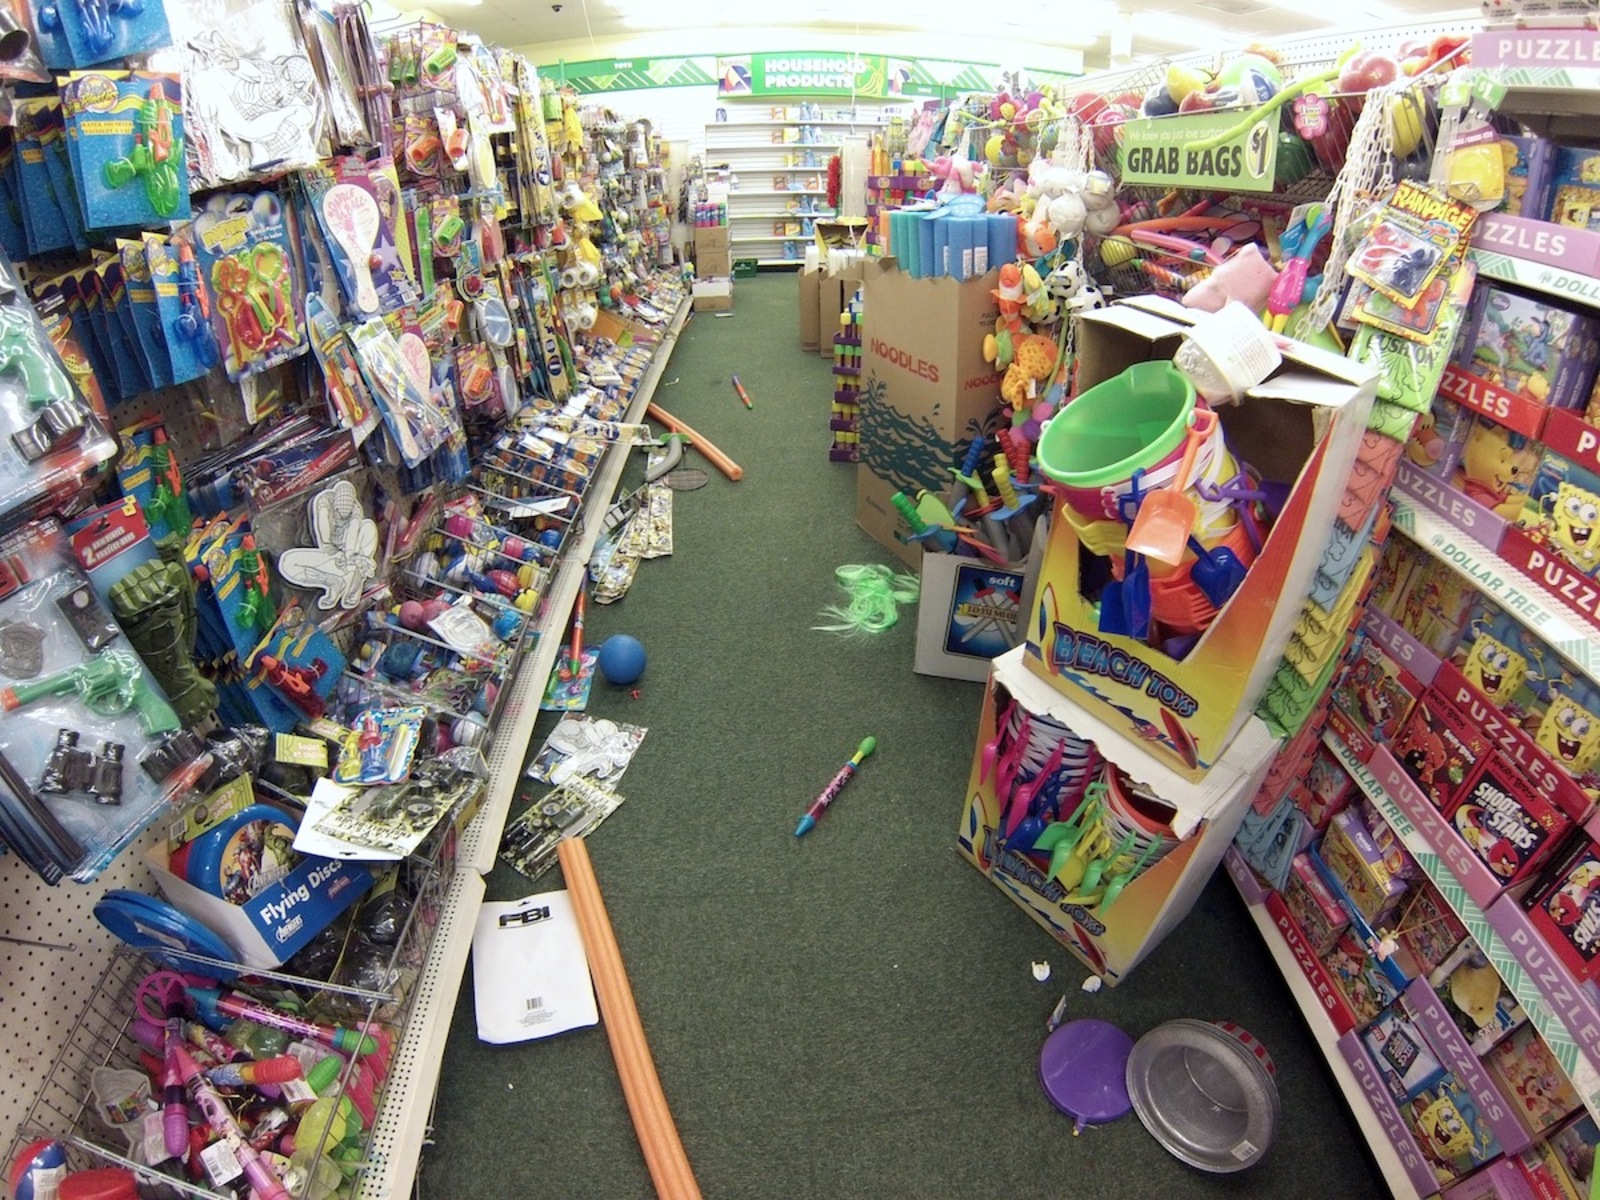 Messy toy aisle